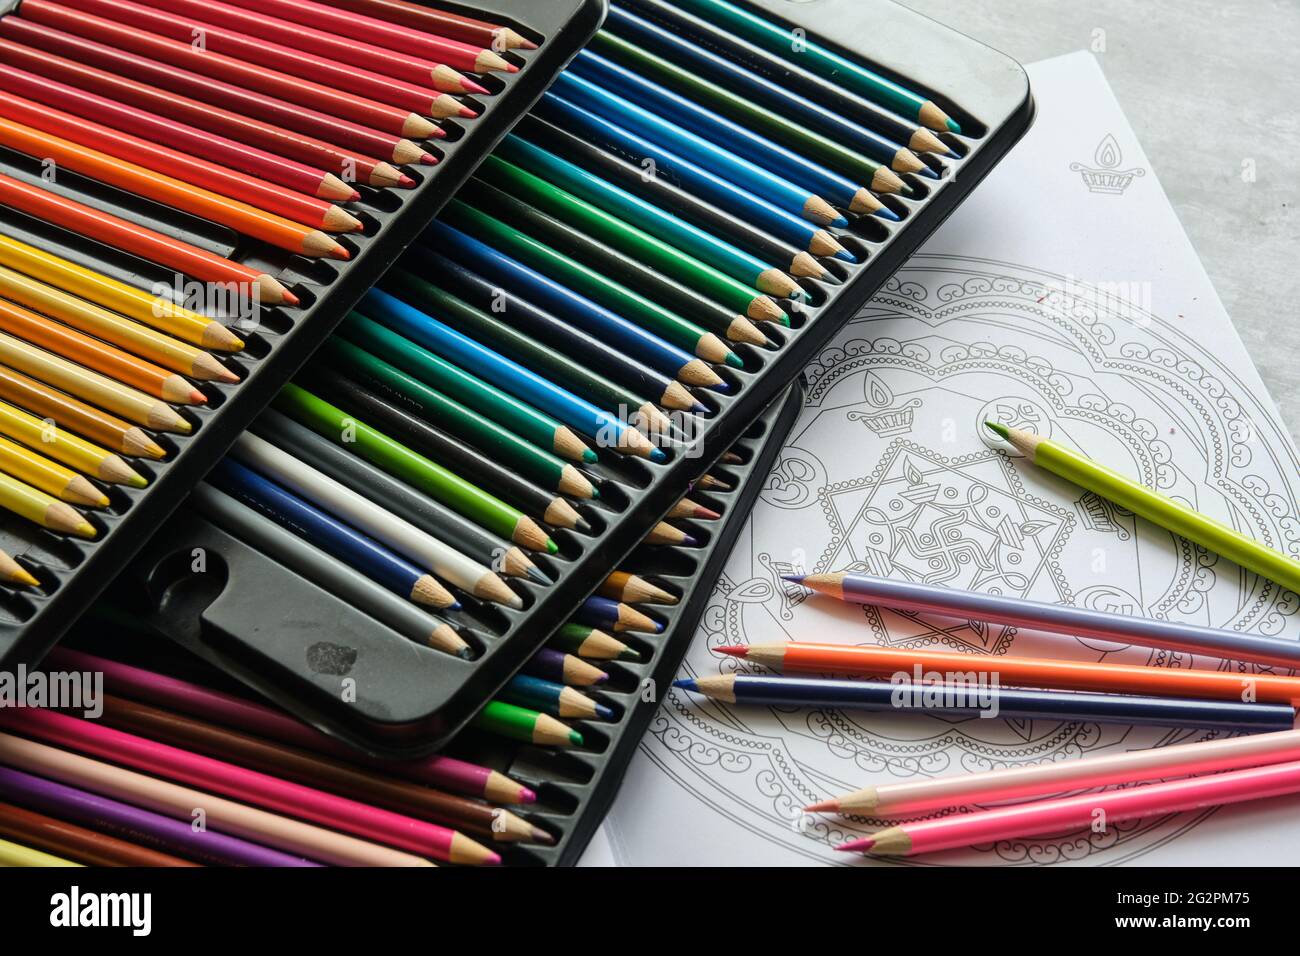 bright colored pencils on a gray background Stock Photo